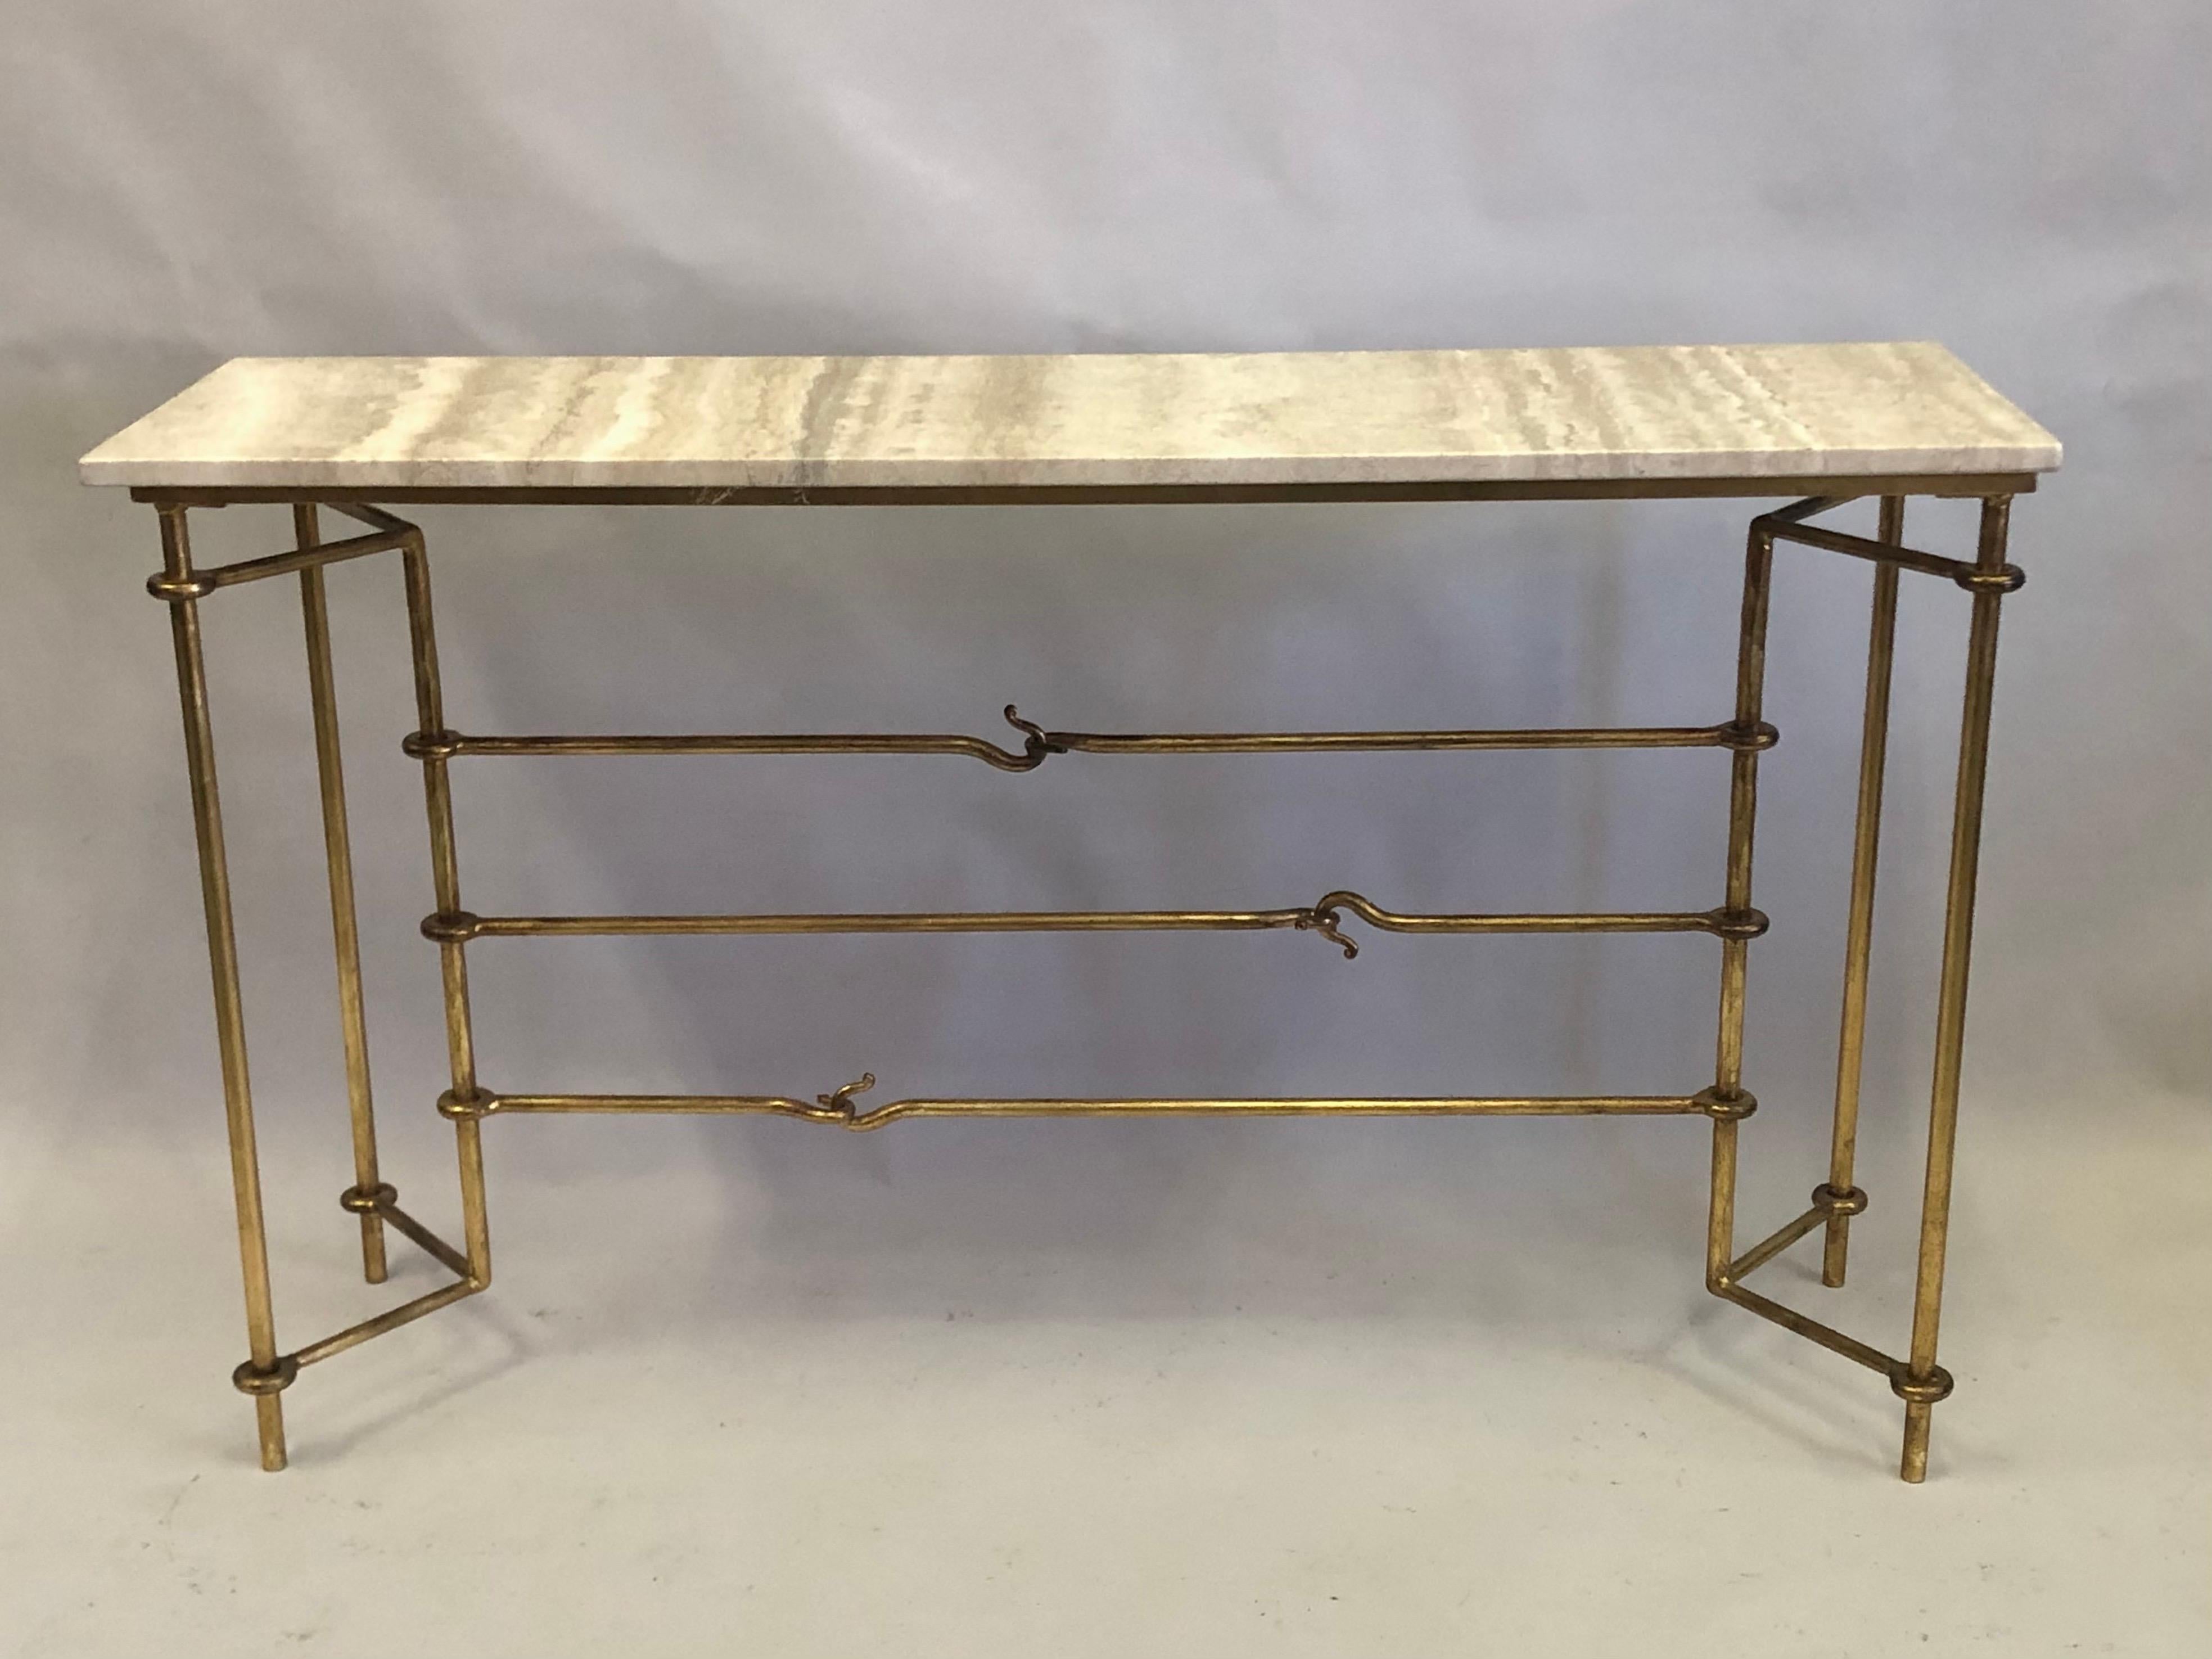 Italian Mid-Century Modern Neoclassical Gilt Iron Console by Banci for Hermès In Good Condition For Sale In New York, NY